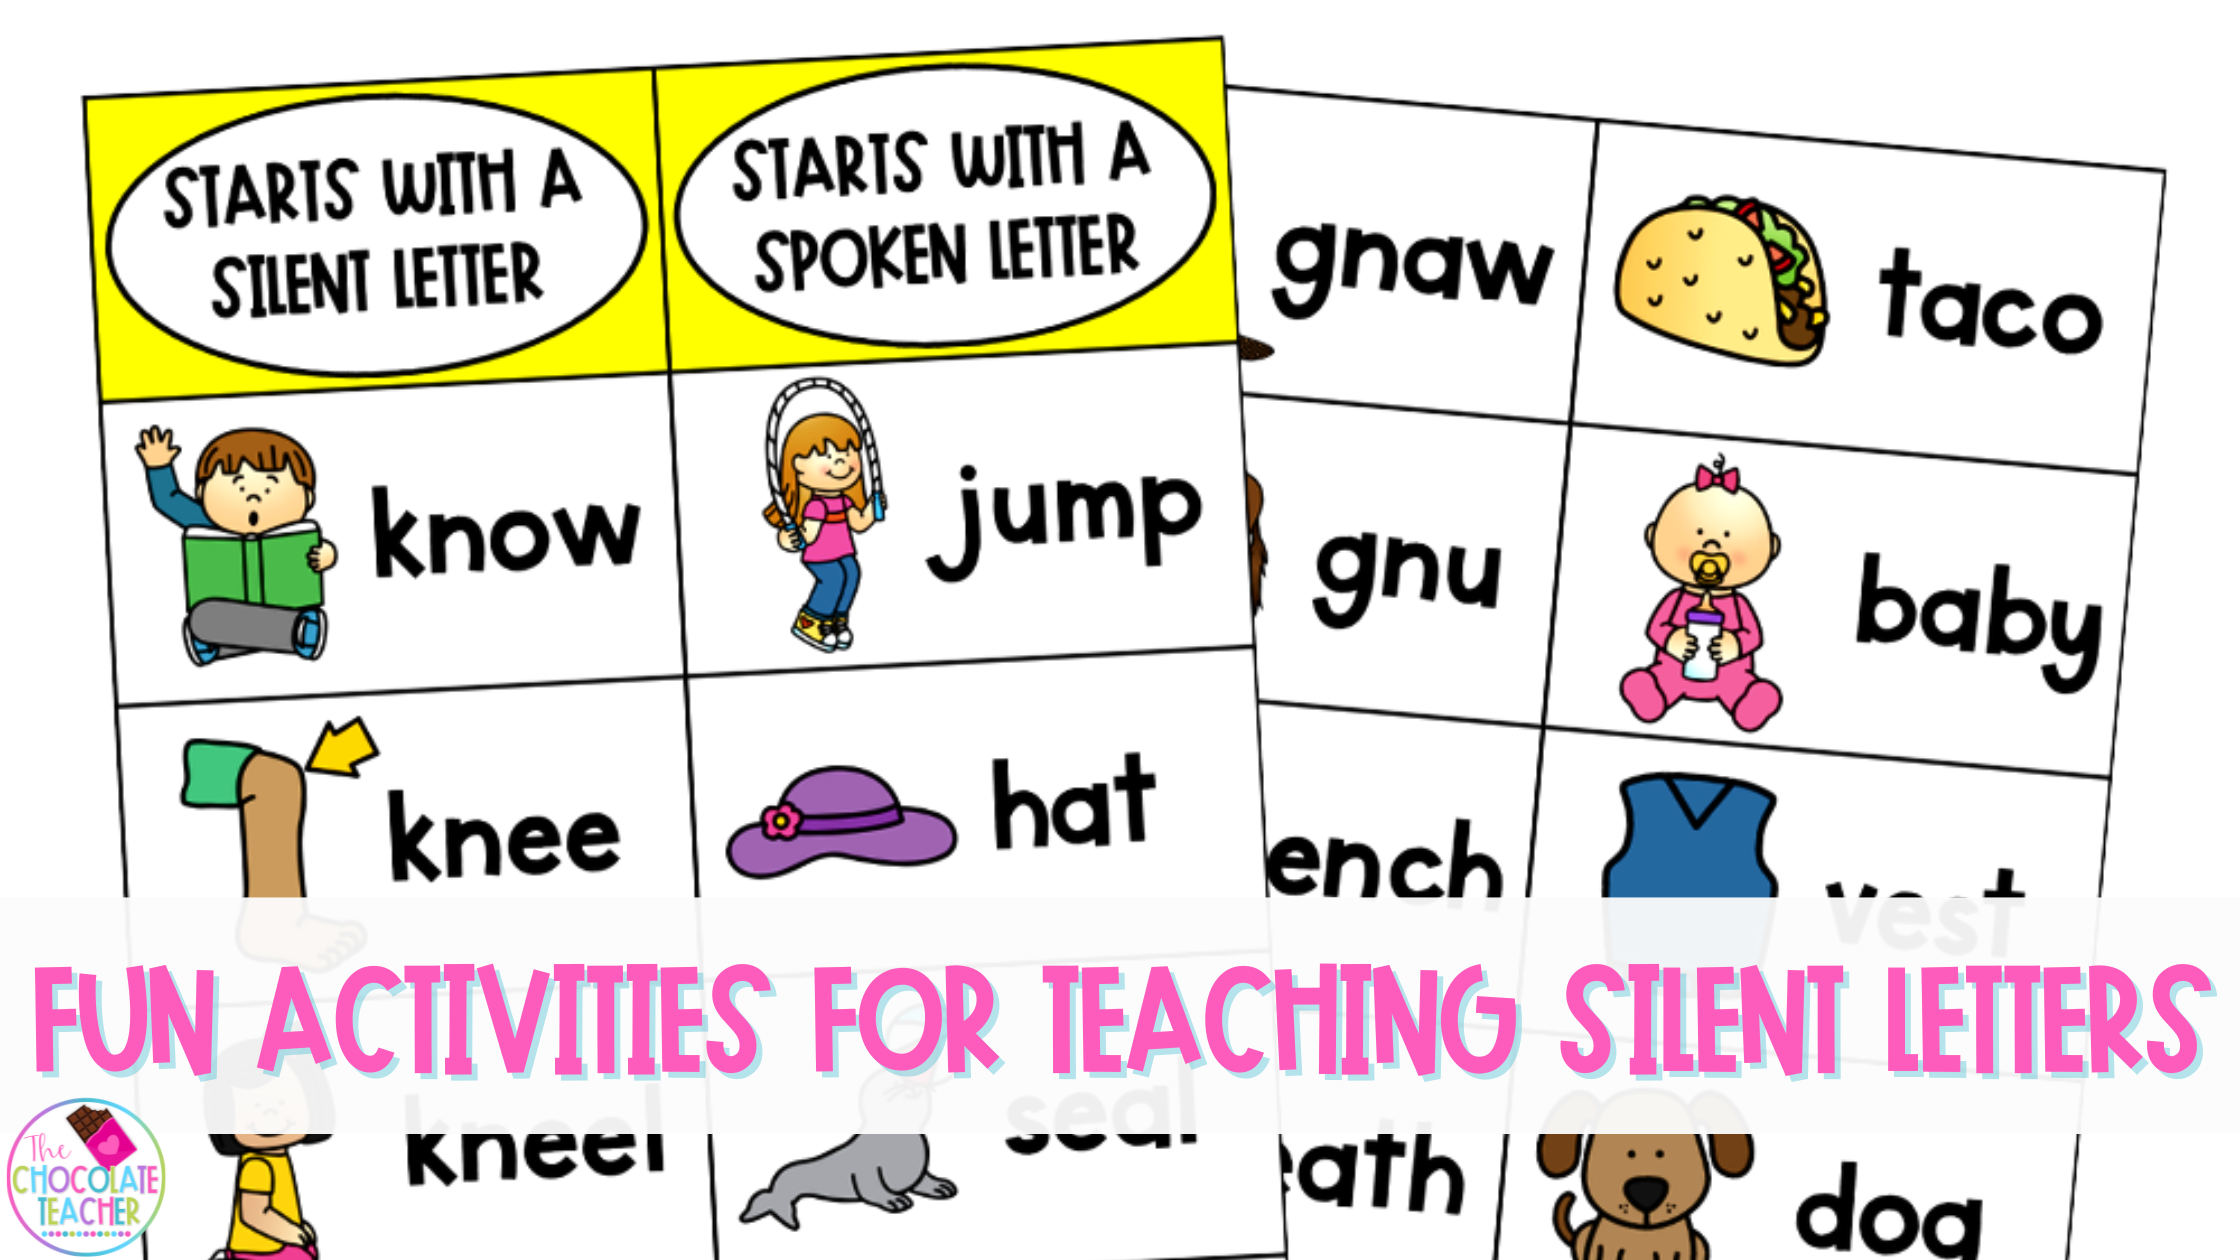 Teaching silent letters to your students can be fun, easy, and engaging with lots of different activities like these.